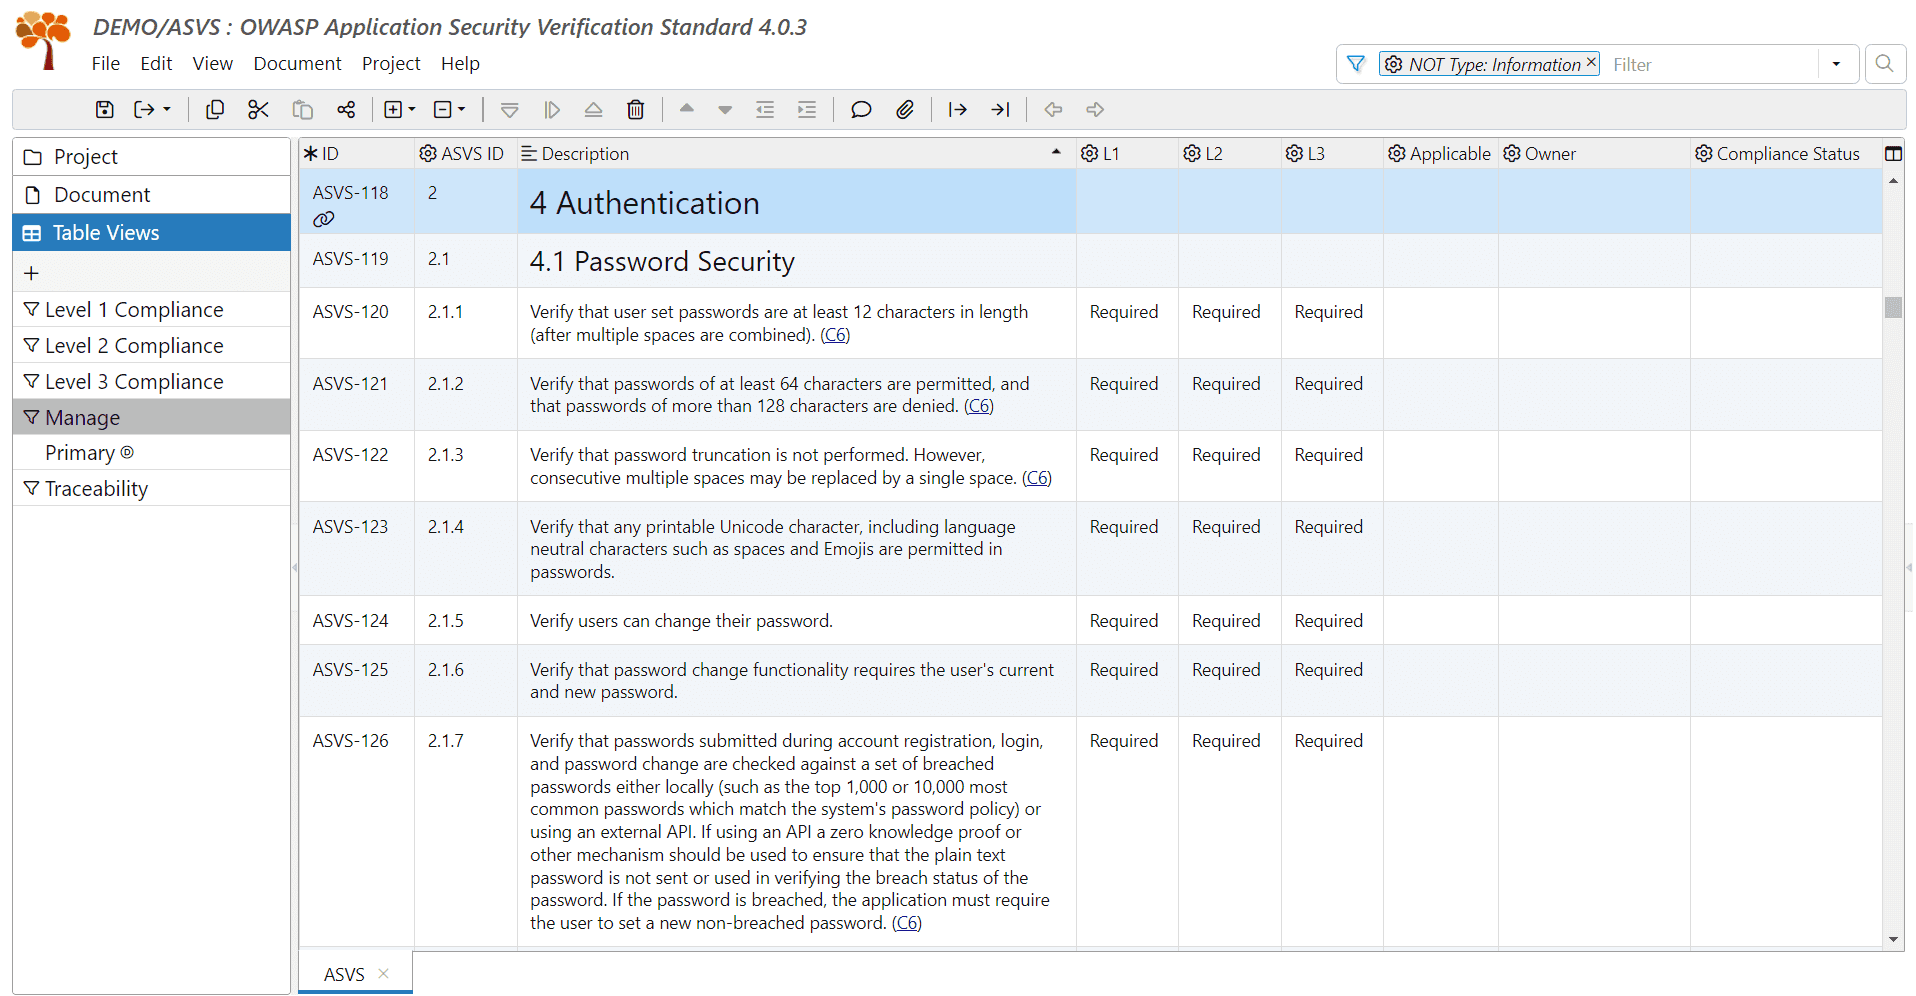 OWASP ASVS documents displayed with the Assignment view in ReqView